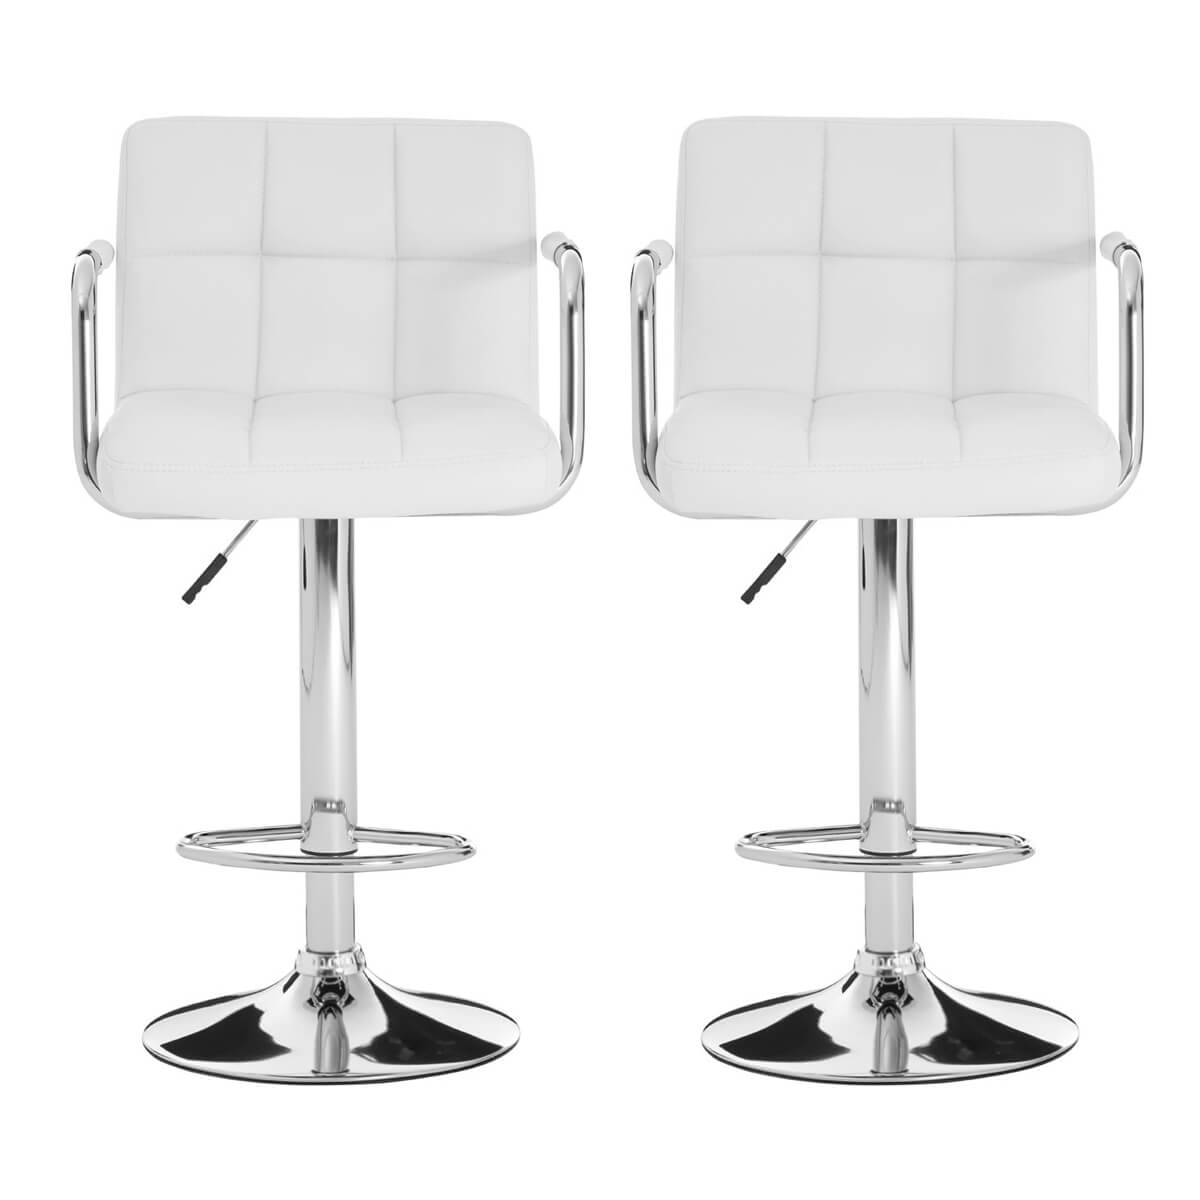 Stars White Faux Leather Bar Stool, White Faux Leather Barstools